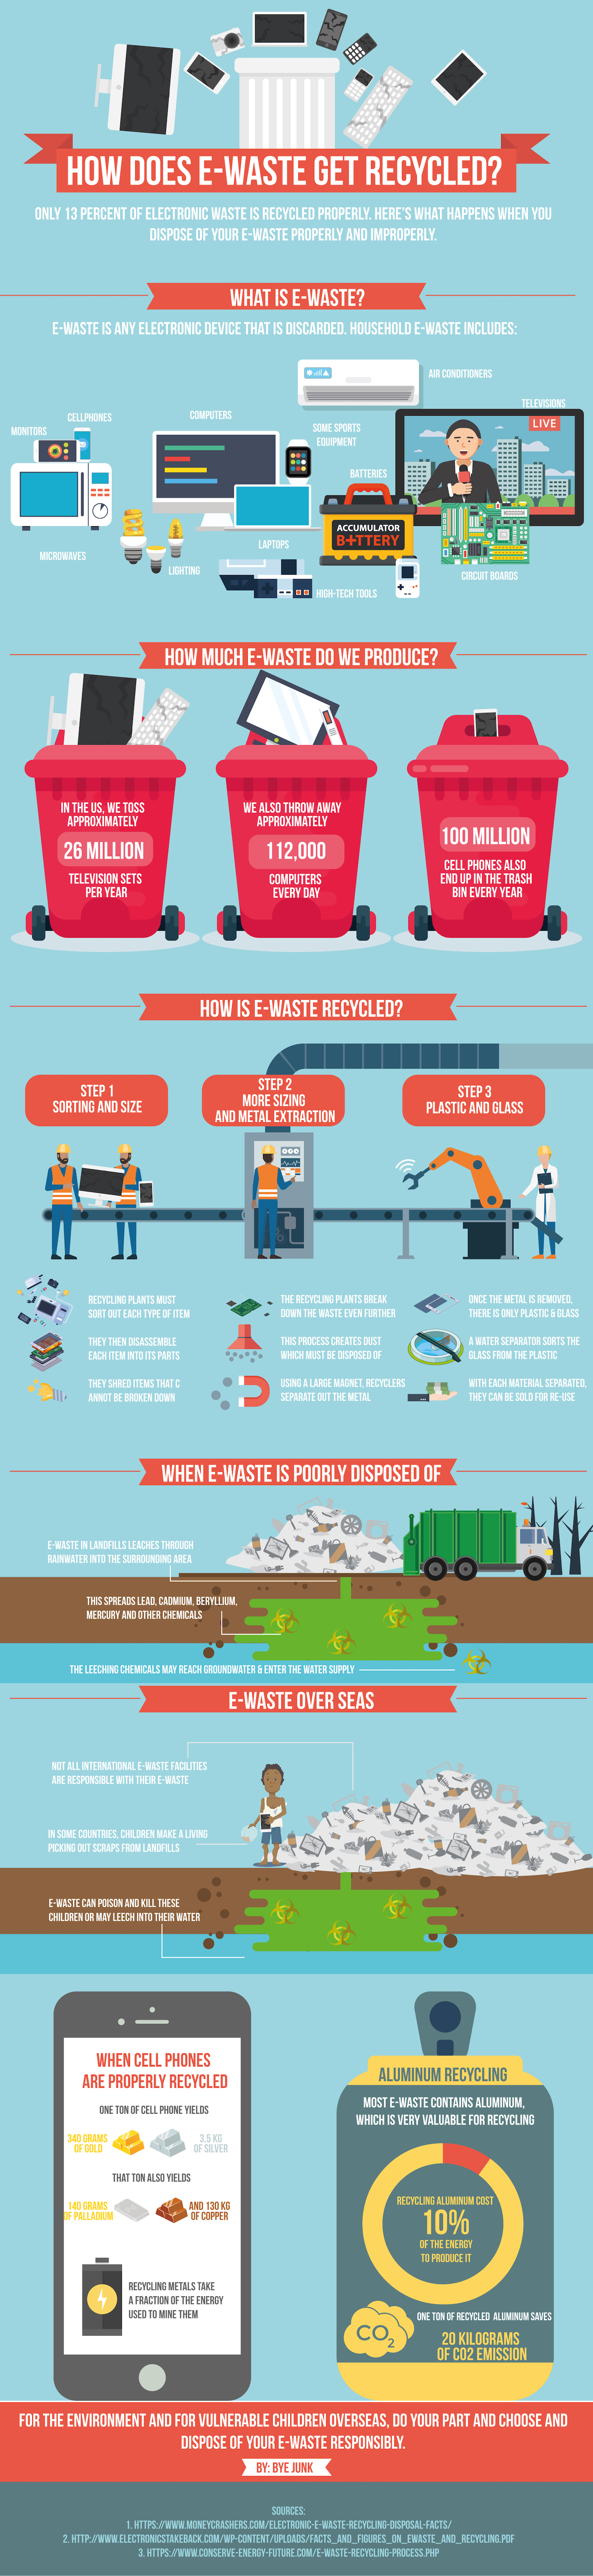 How Does E-Waste Get Recycled?